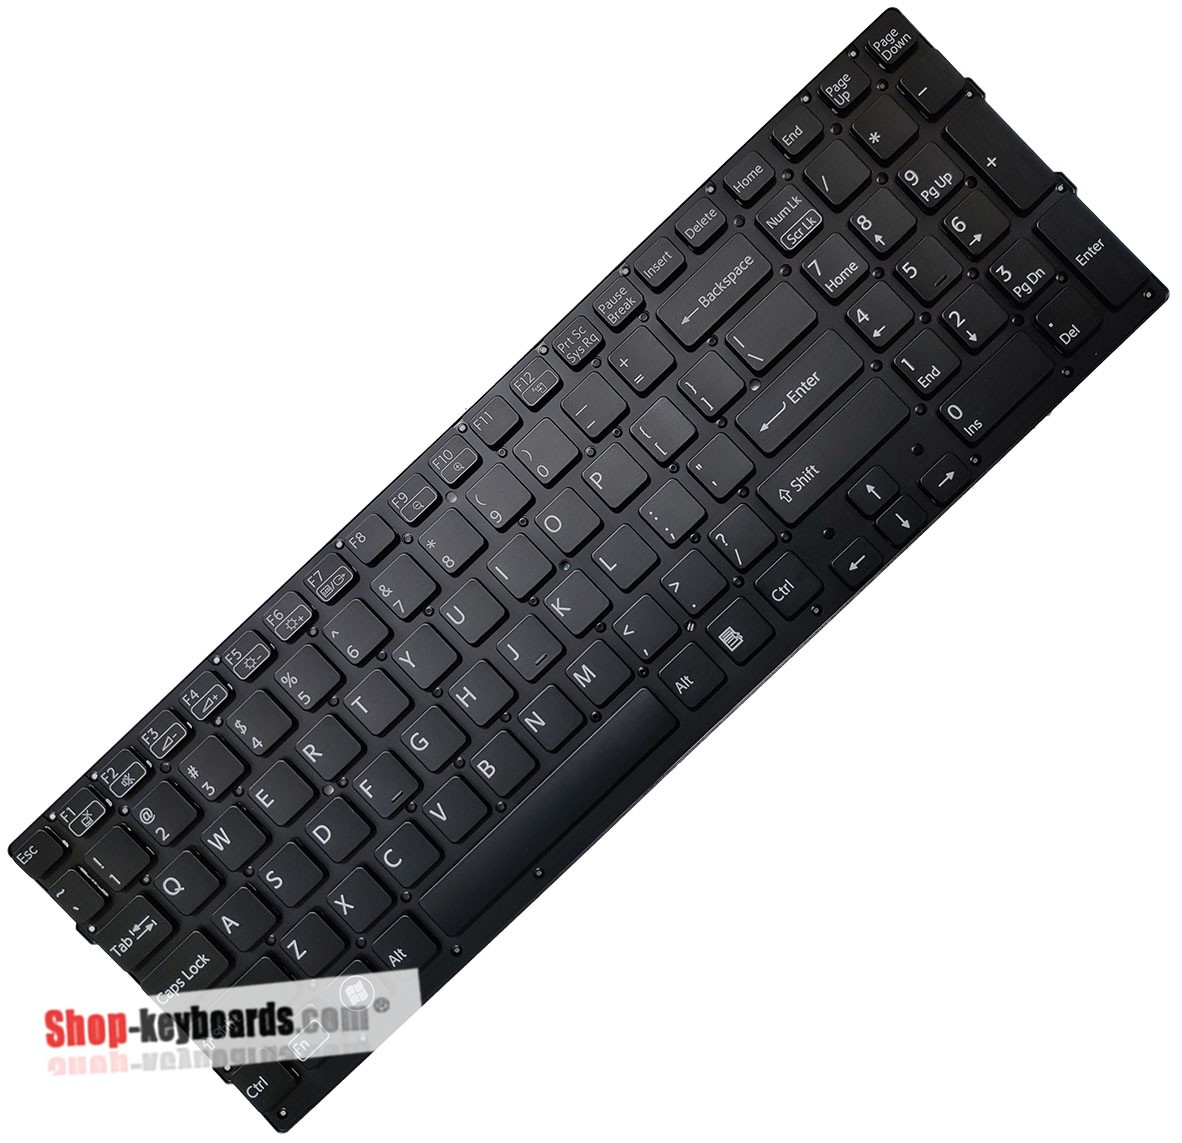 Sony VAIO VPC-F23N1E Keyboard replacement